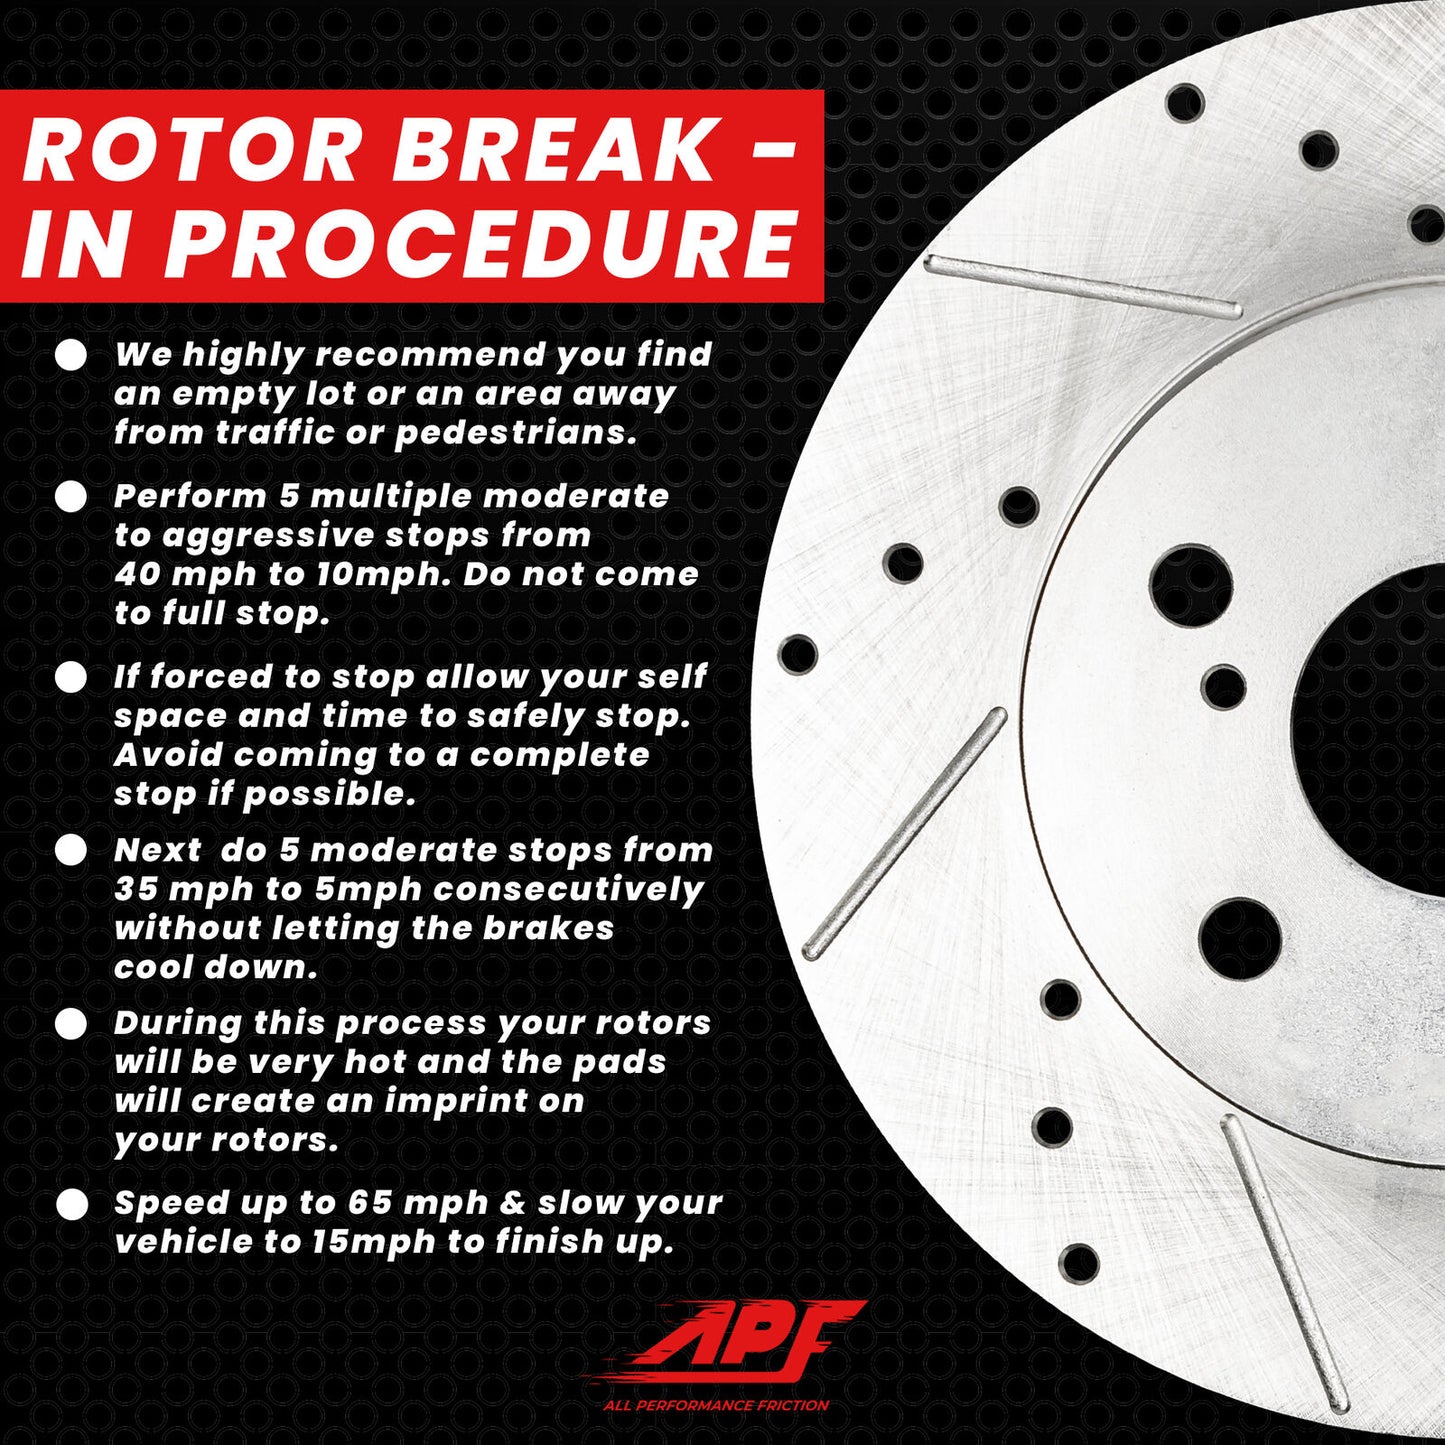 APF All Performance Friction Rear Rotors and Pads Half Kit compatible with Honda Odyssey 2002-2004 Zinc Drilled Slotted Rotors with Ceramic Carbon Fiber Brake Pads | $88.19